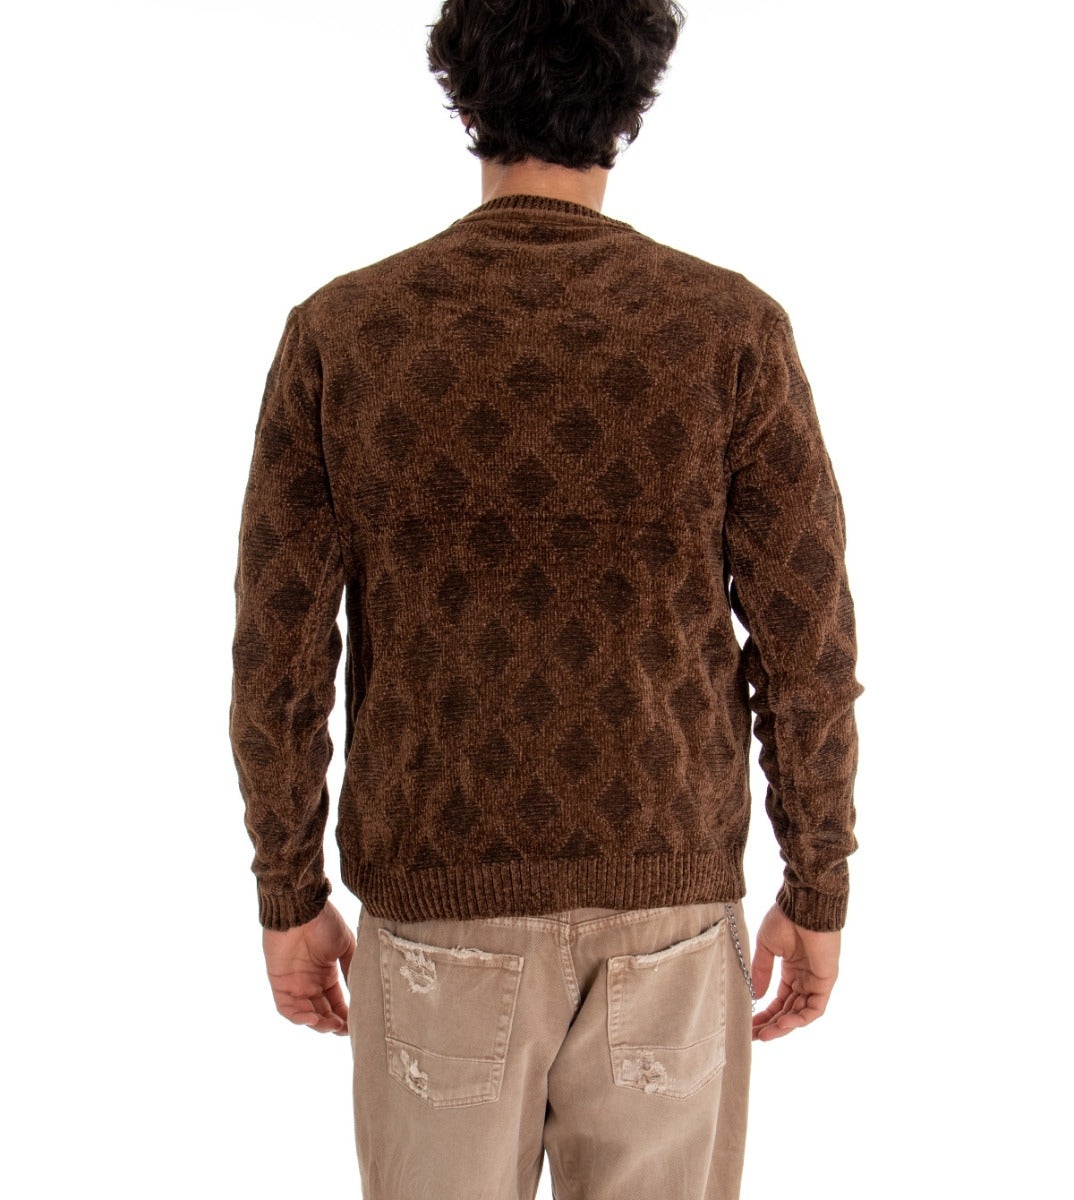 Men's Round Neck Sweater Solid Color Brown Diamonds Long Sleeves GIOSAL